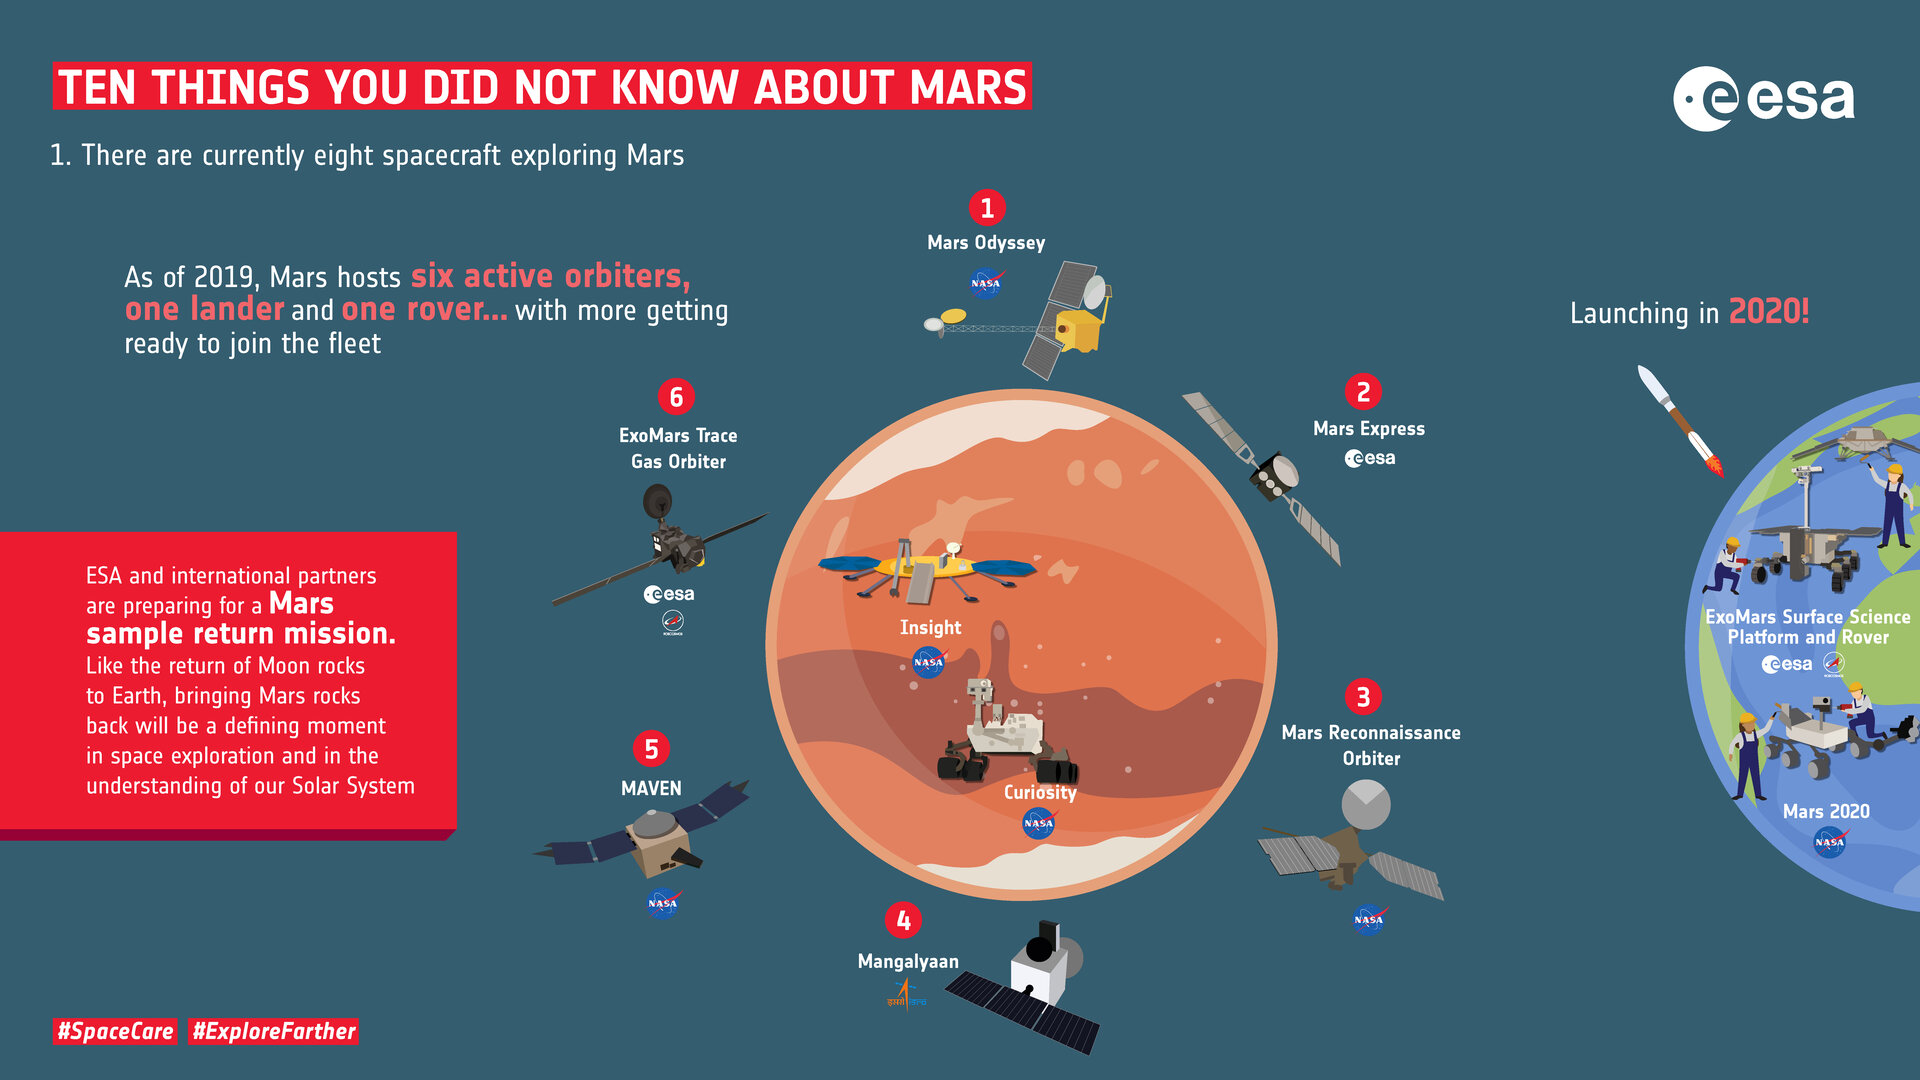 Ten things you did not know about Mars: 1. Mars exploration